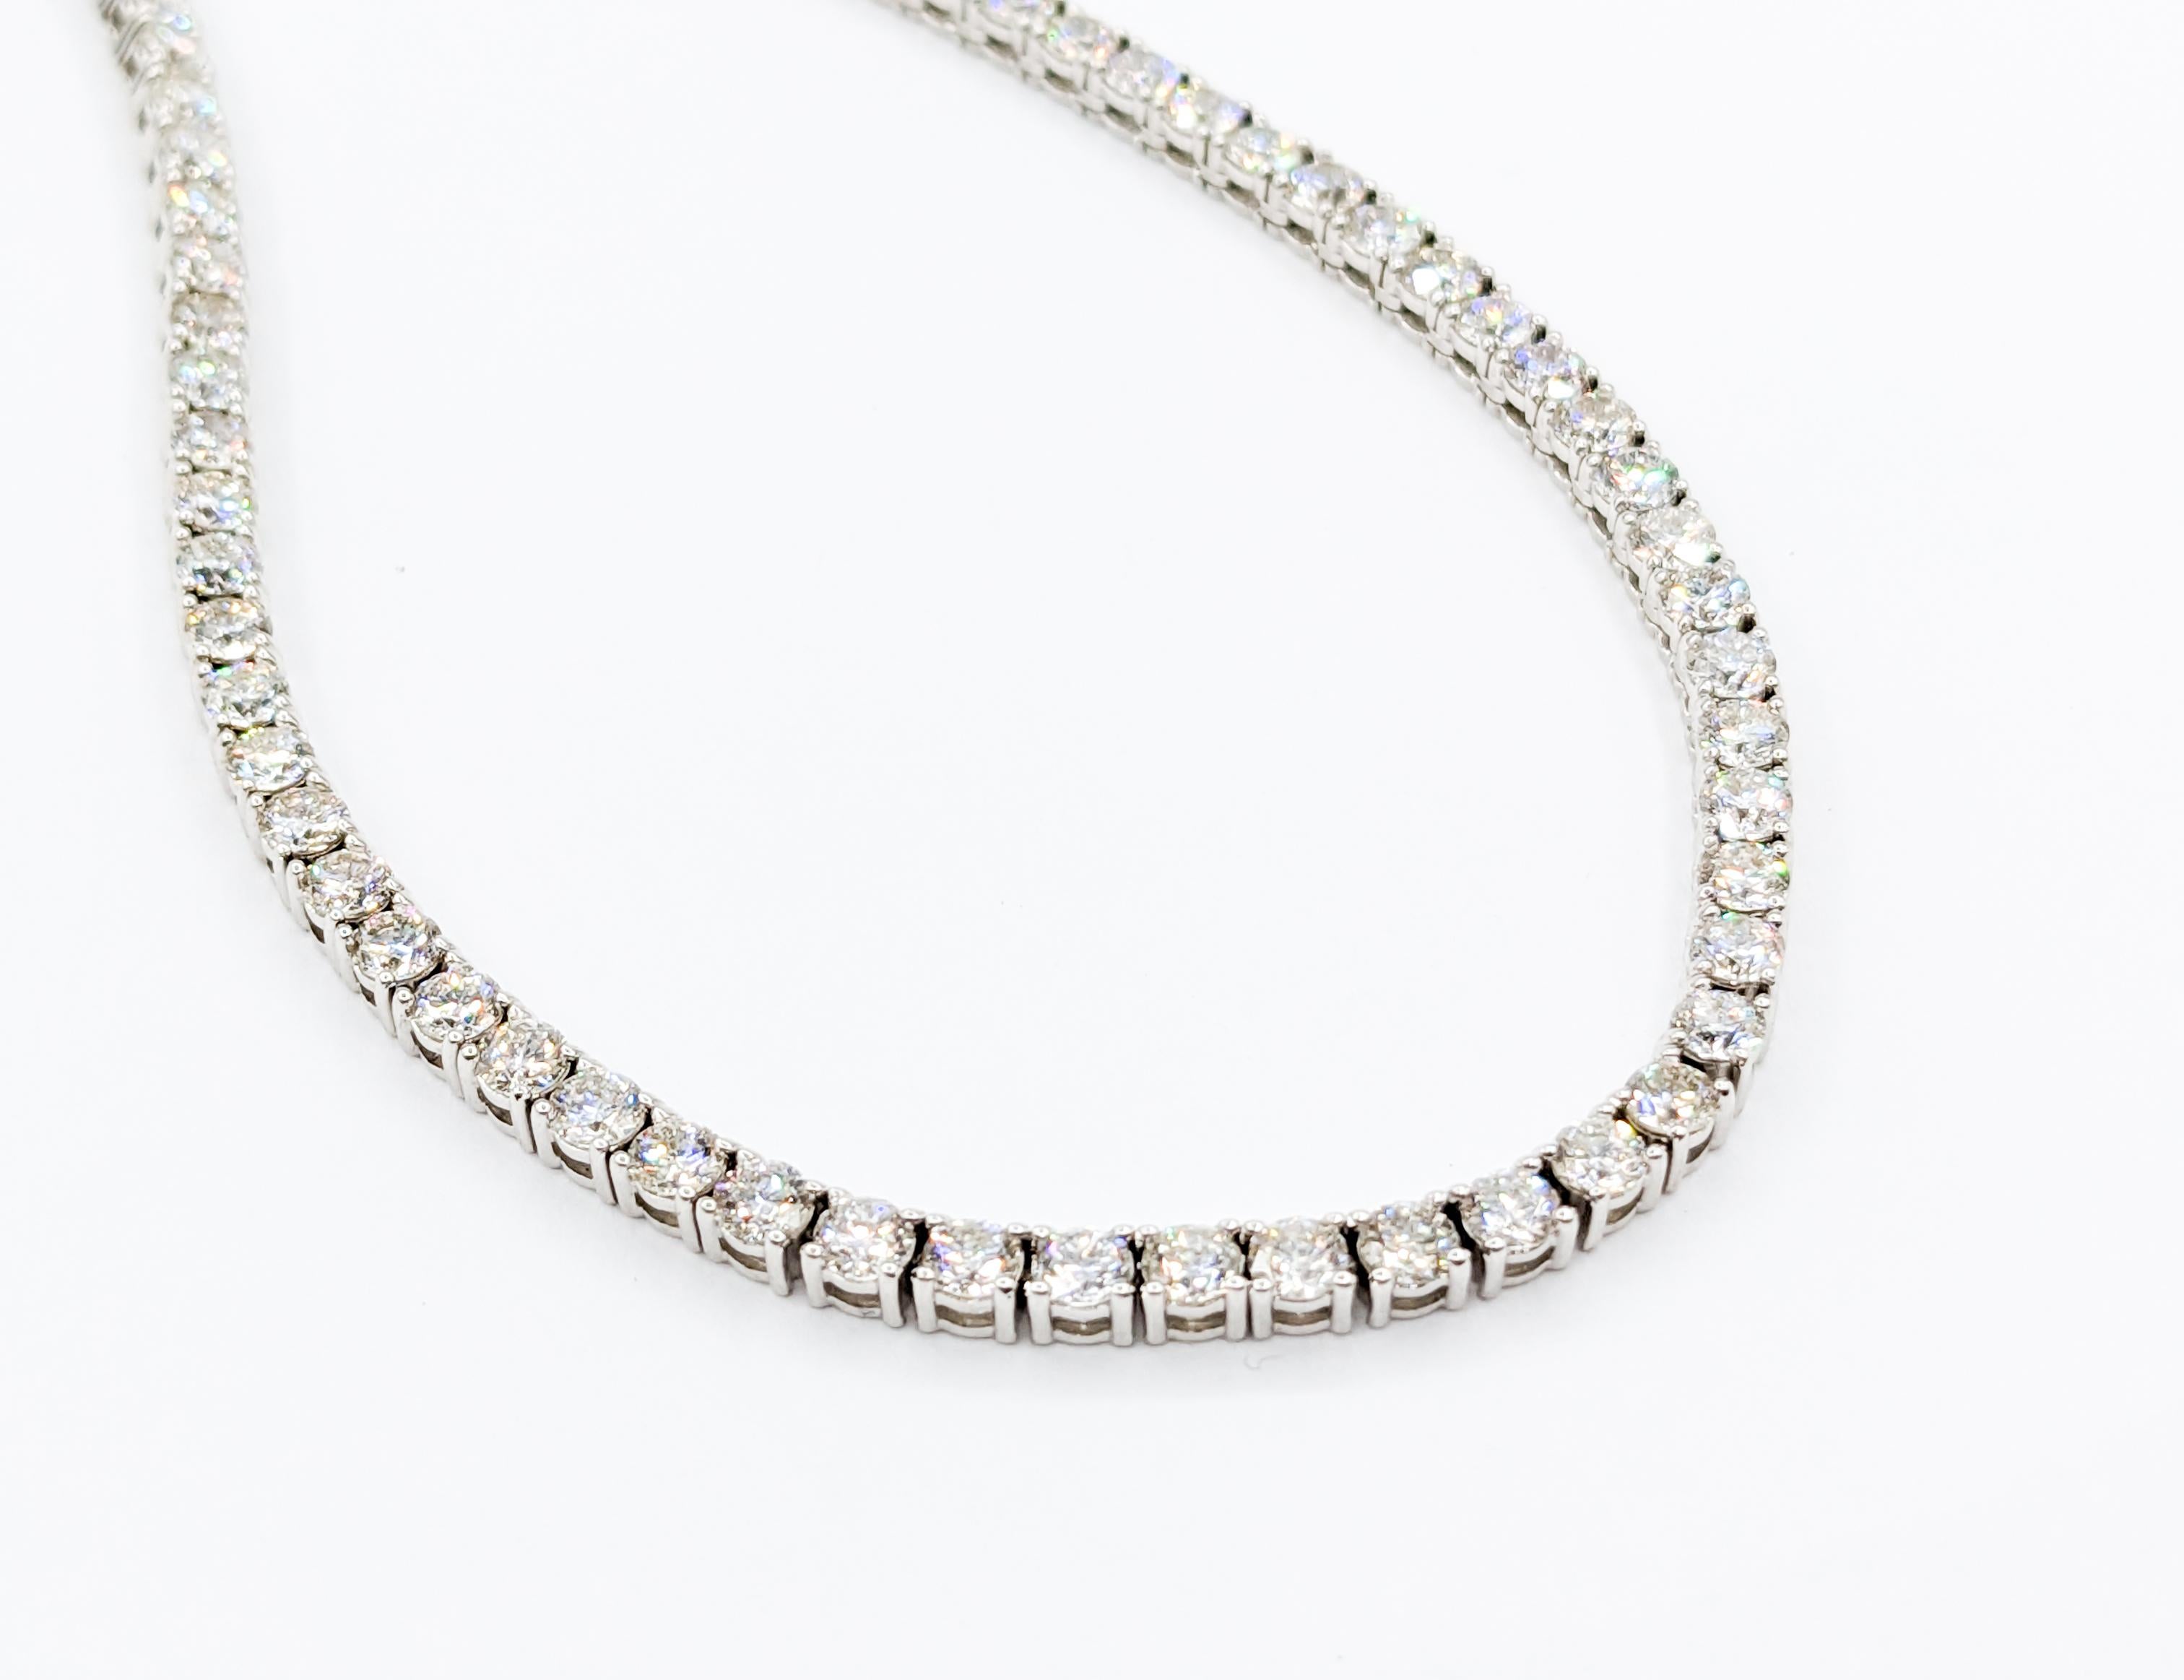 Beautiful 16.88ctw Natural Diamond Tennis Necklace in 14Kt White Gold 1